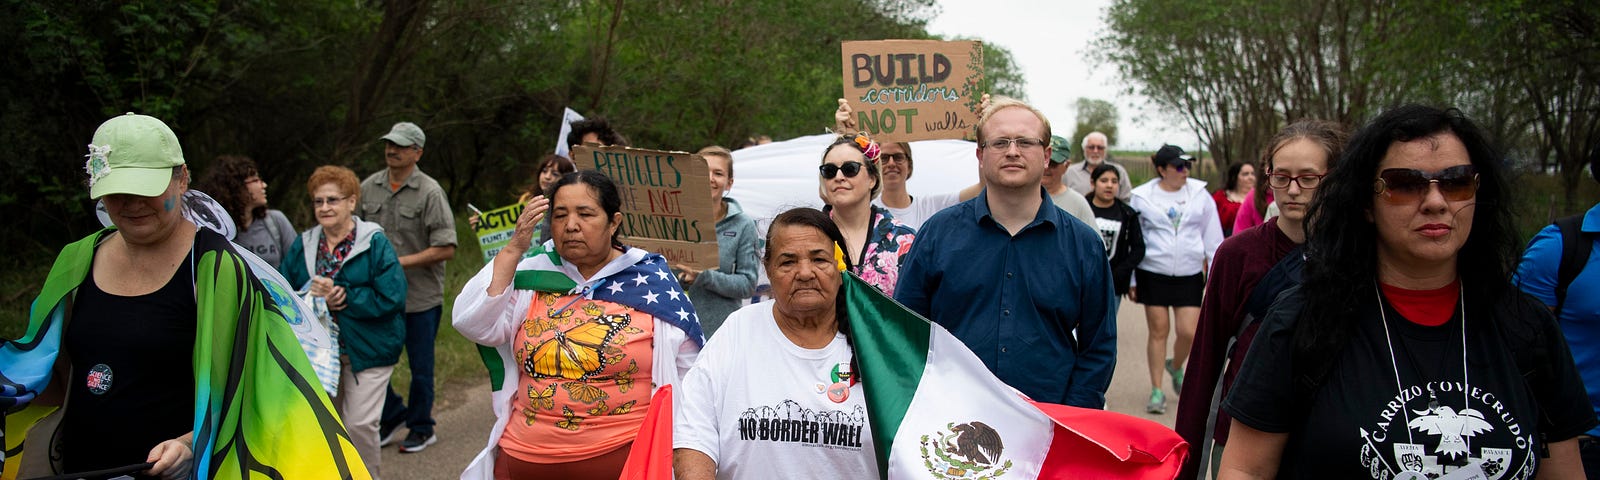 The Rio Grande Valley Climate March at the National Butterfly Center in Mission, Texas on March 3, 2019.